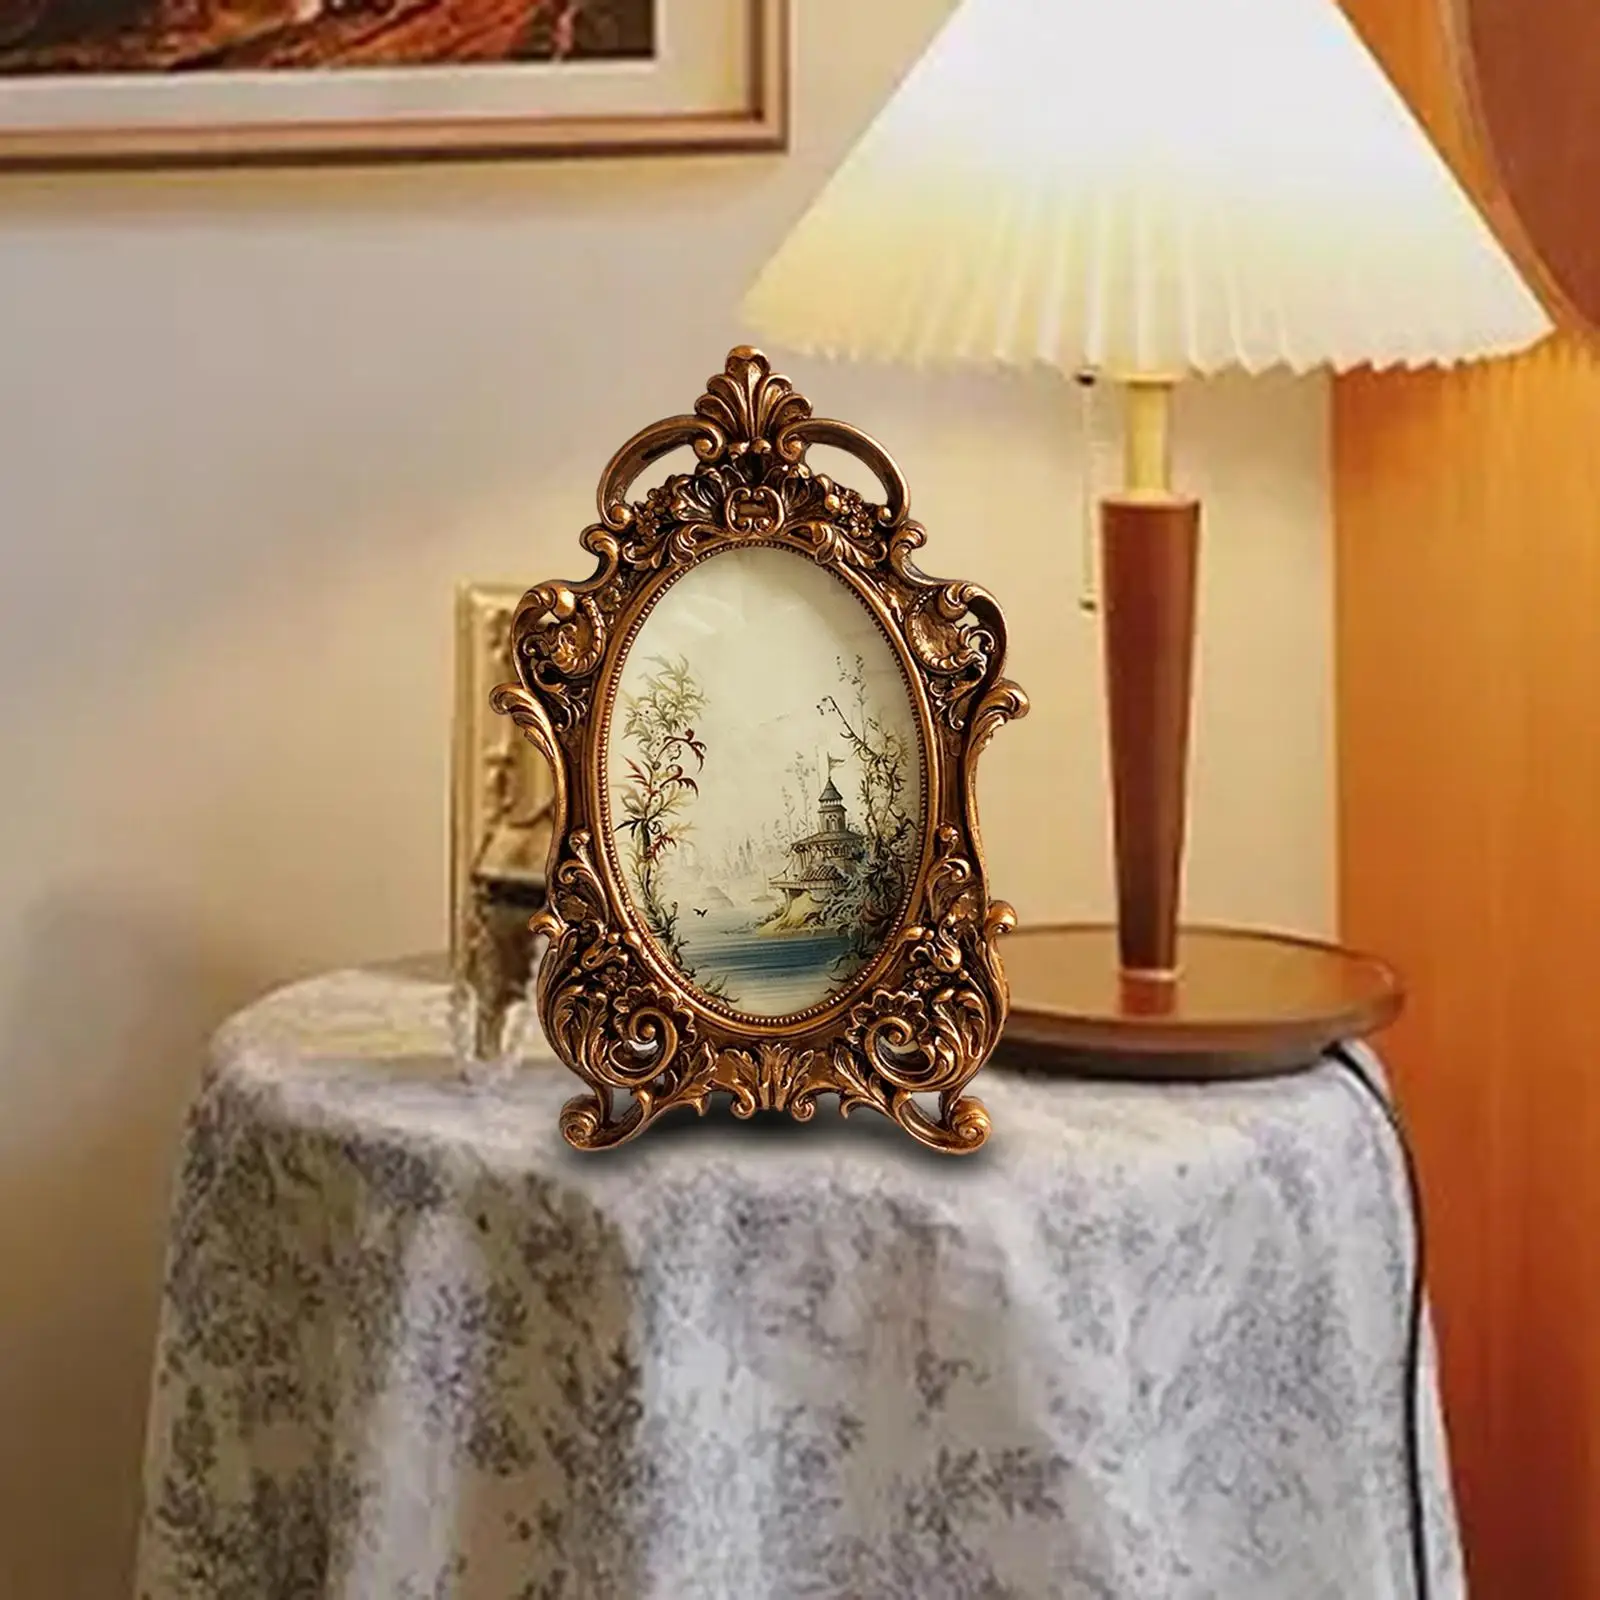 Vintage Picture Frame Decorative Photo Holder Antique Resin Photo Gallery Art Photo Picture Holder for Hallway Table Decoration